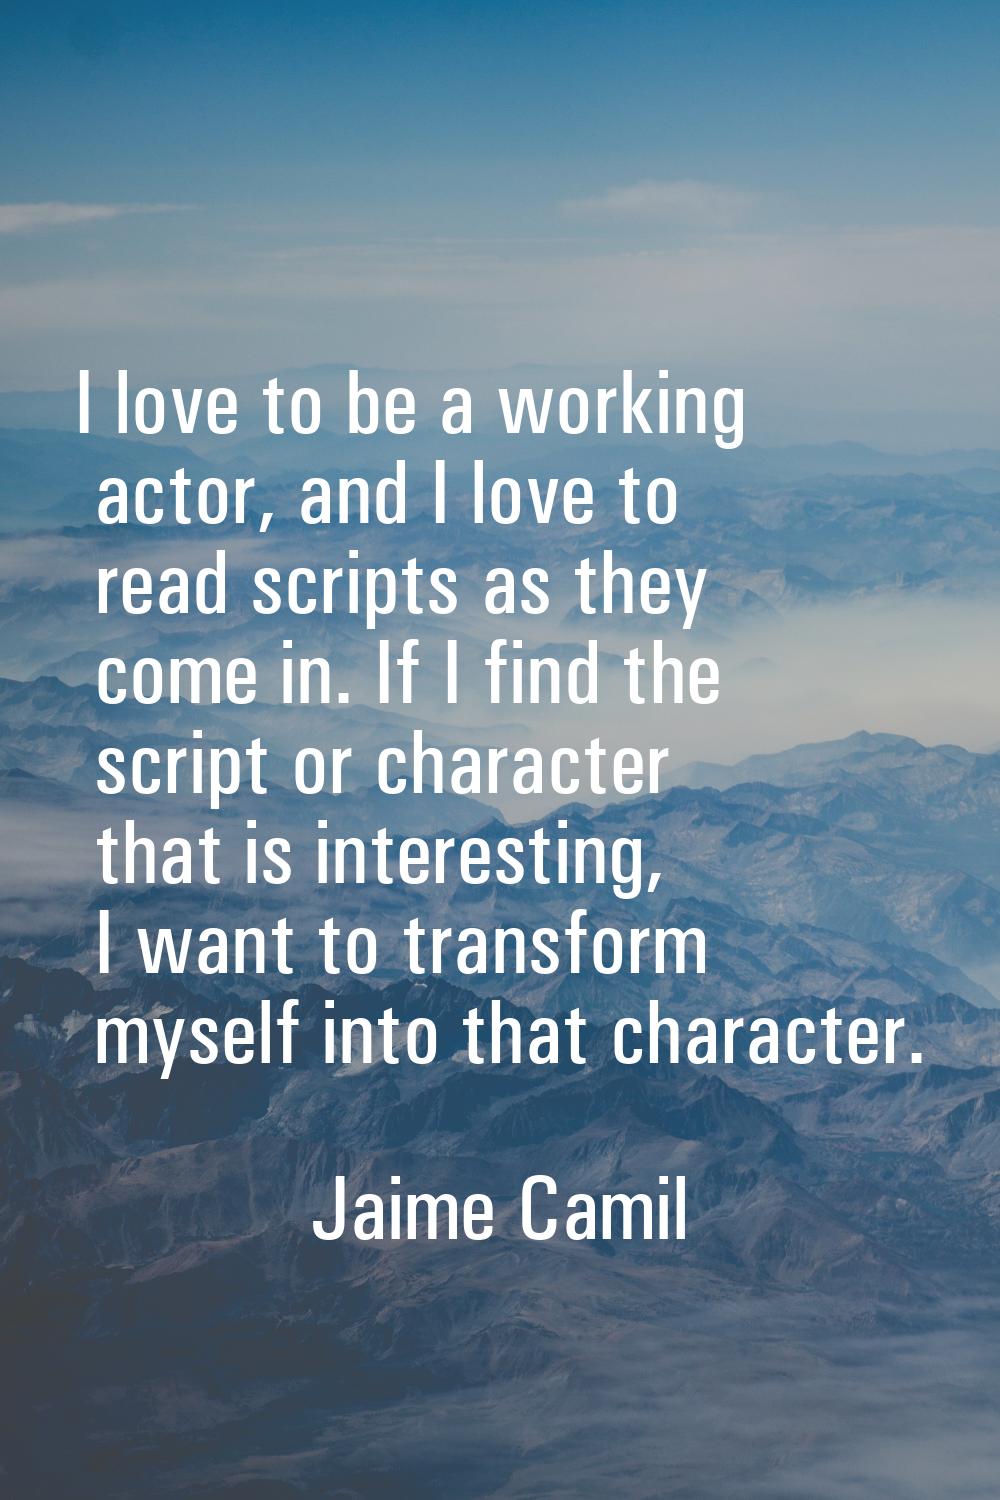 I love to be a working actor, and I love to read scripts as they come in. If I find the script or c